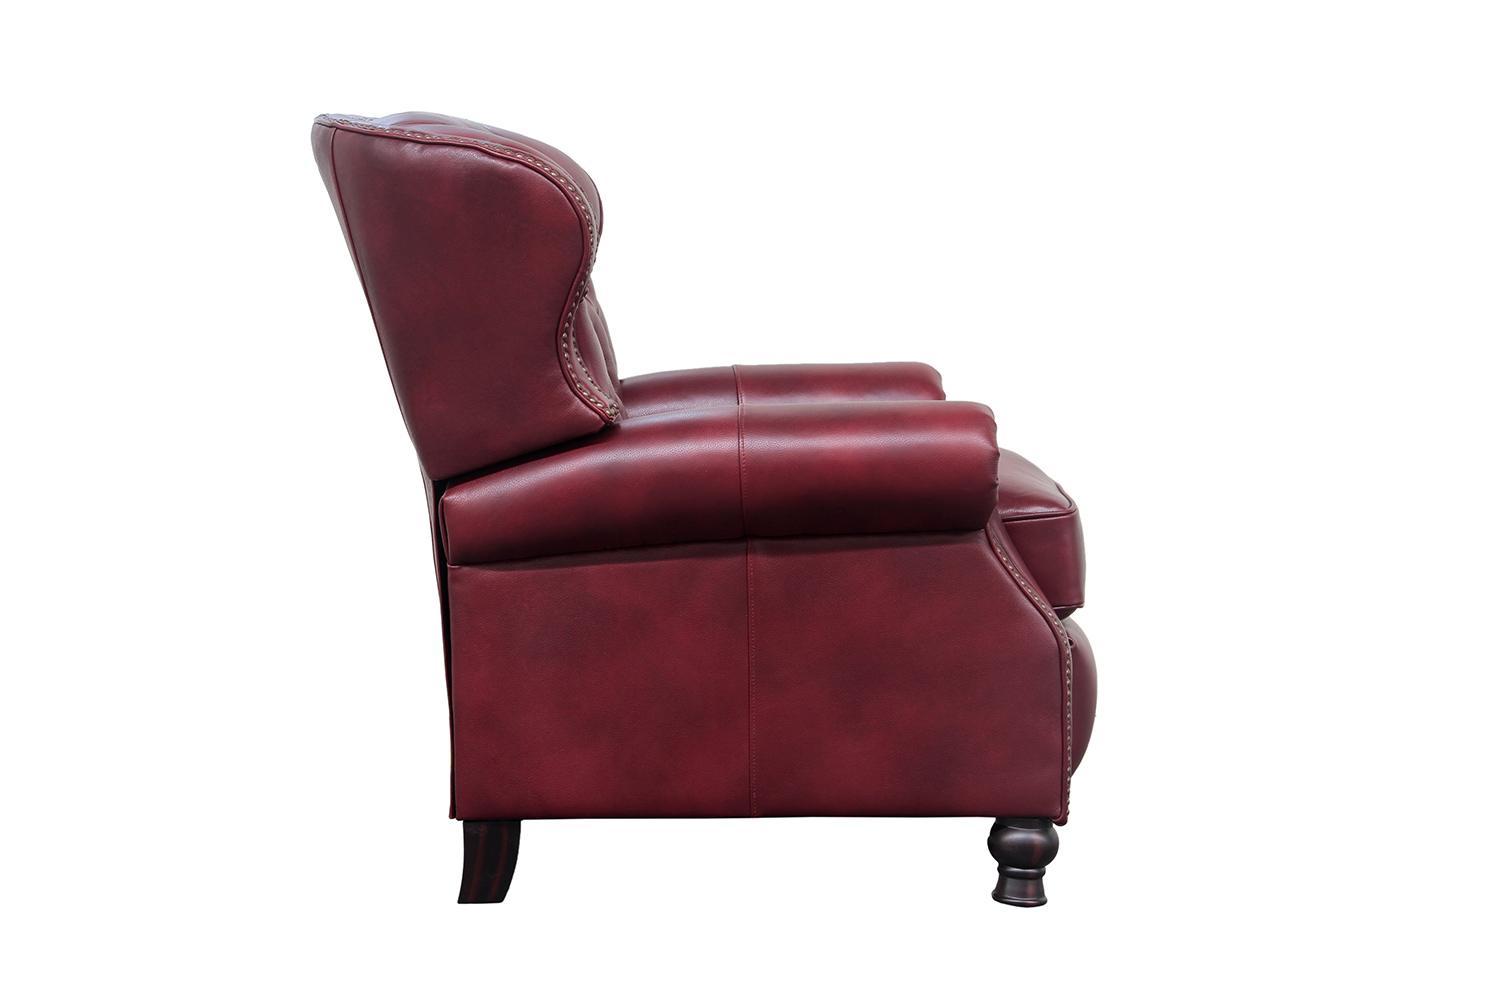 Barcalounger Presidential Recliner Chair - Wenlock Carmine/All Leather